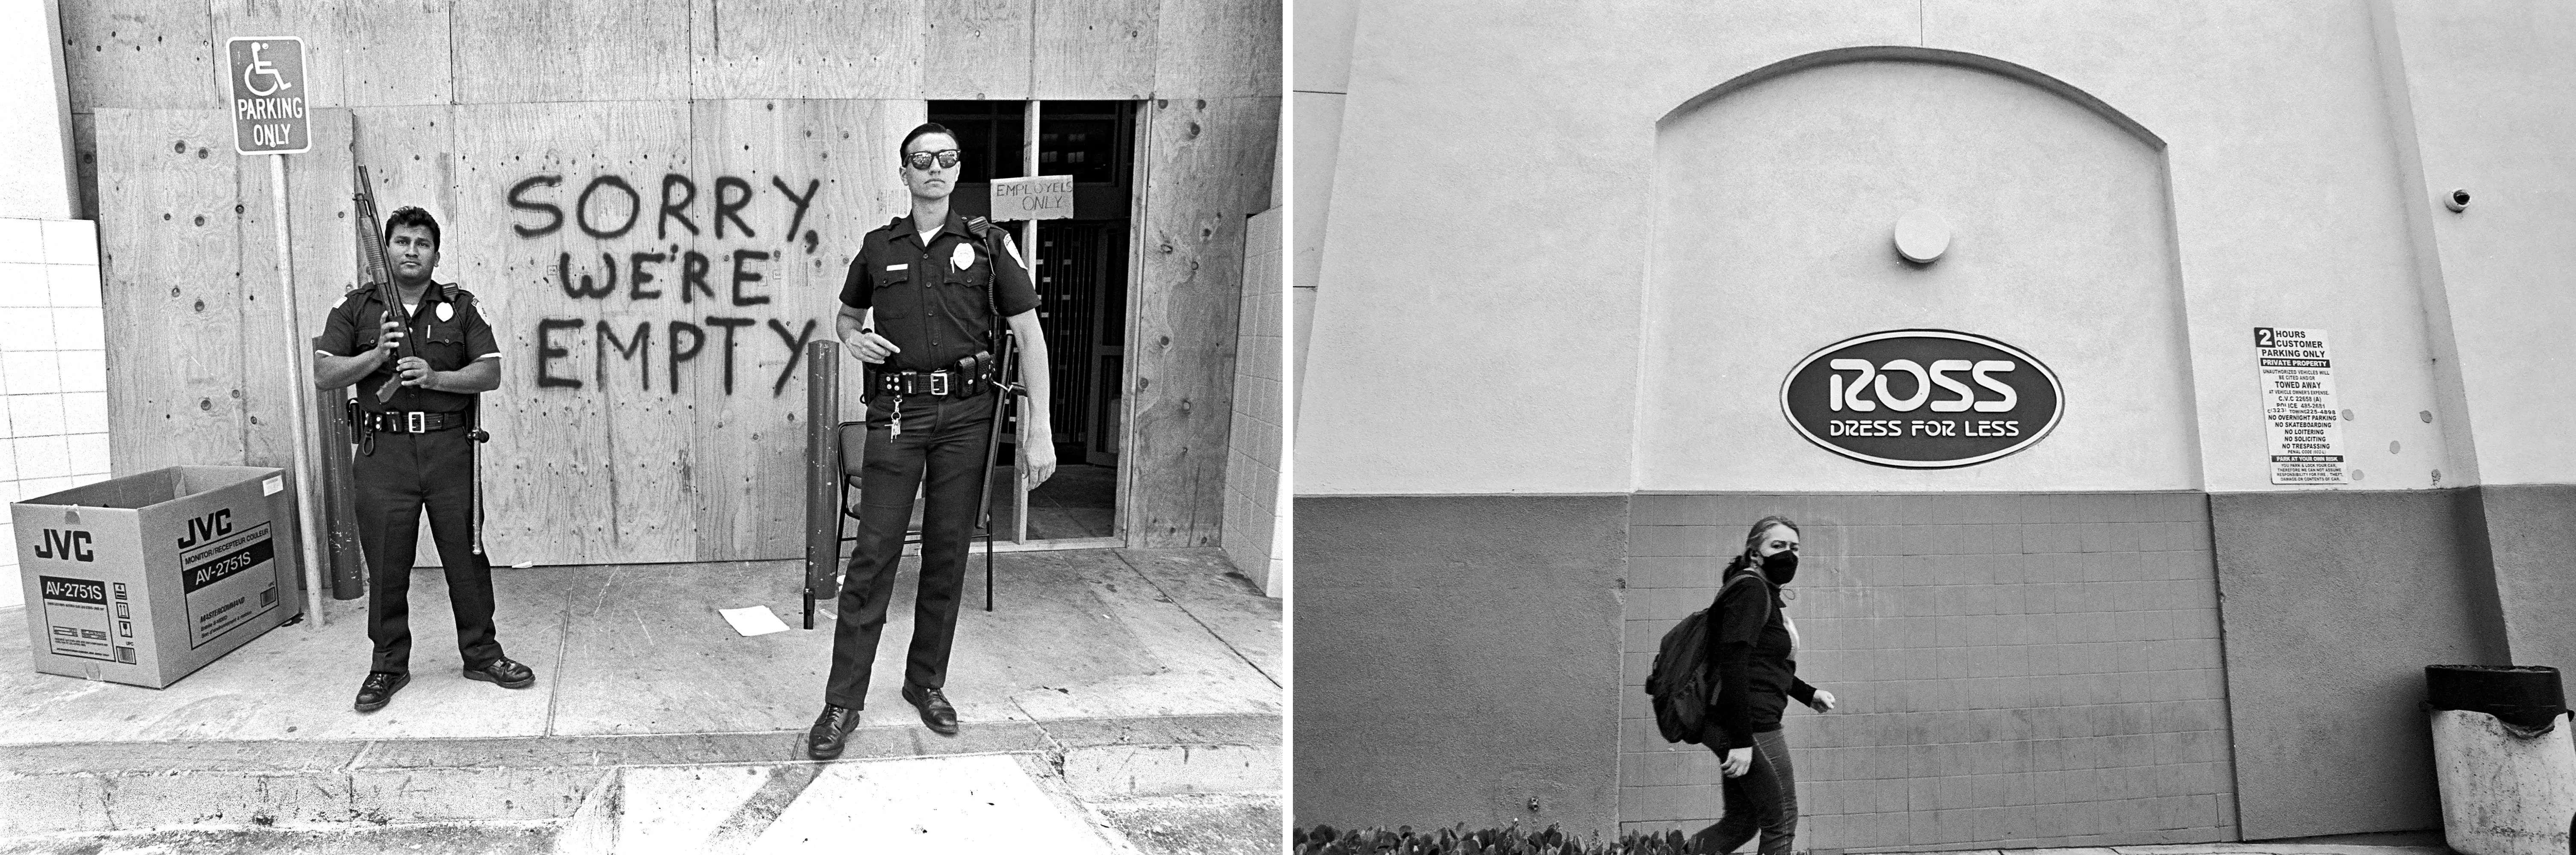 Two pictures are shown side by side: On the left, two guards stand in front of a building; on the right, someone walks past a building.